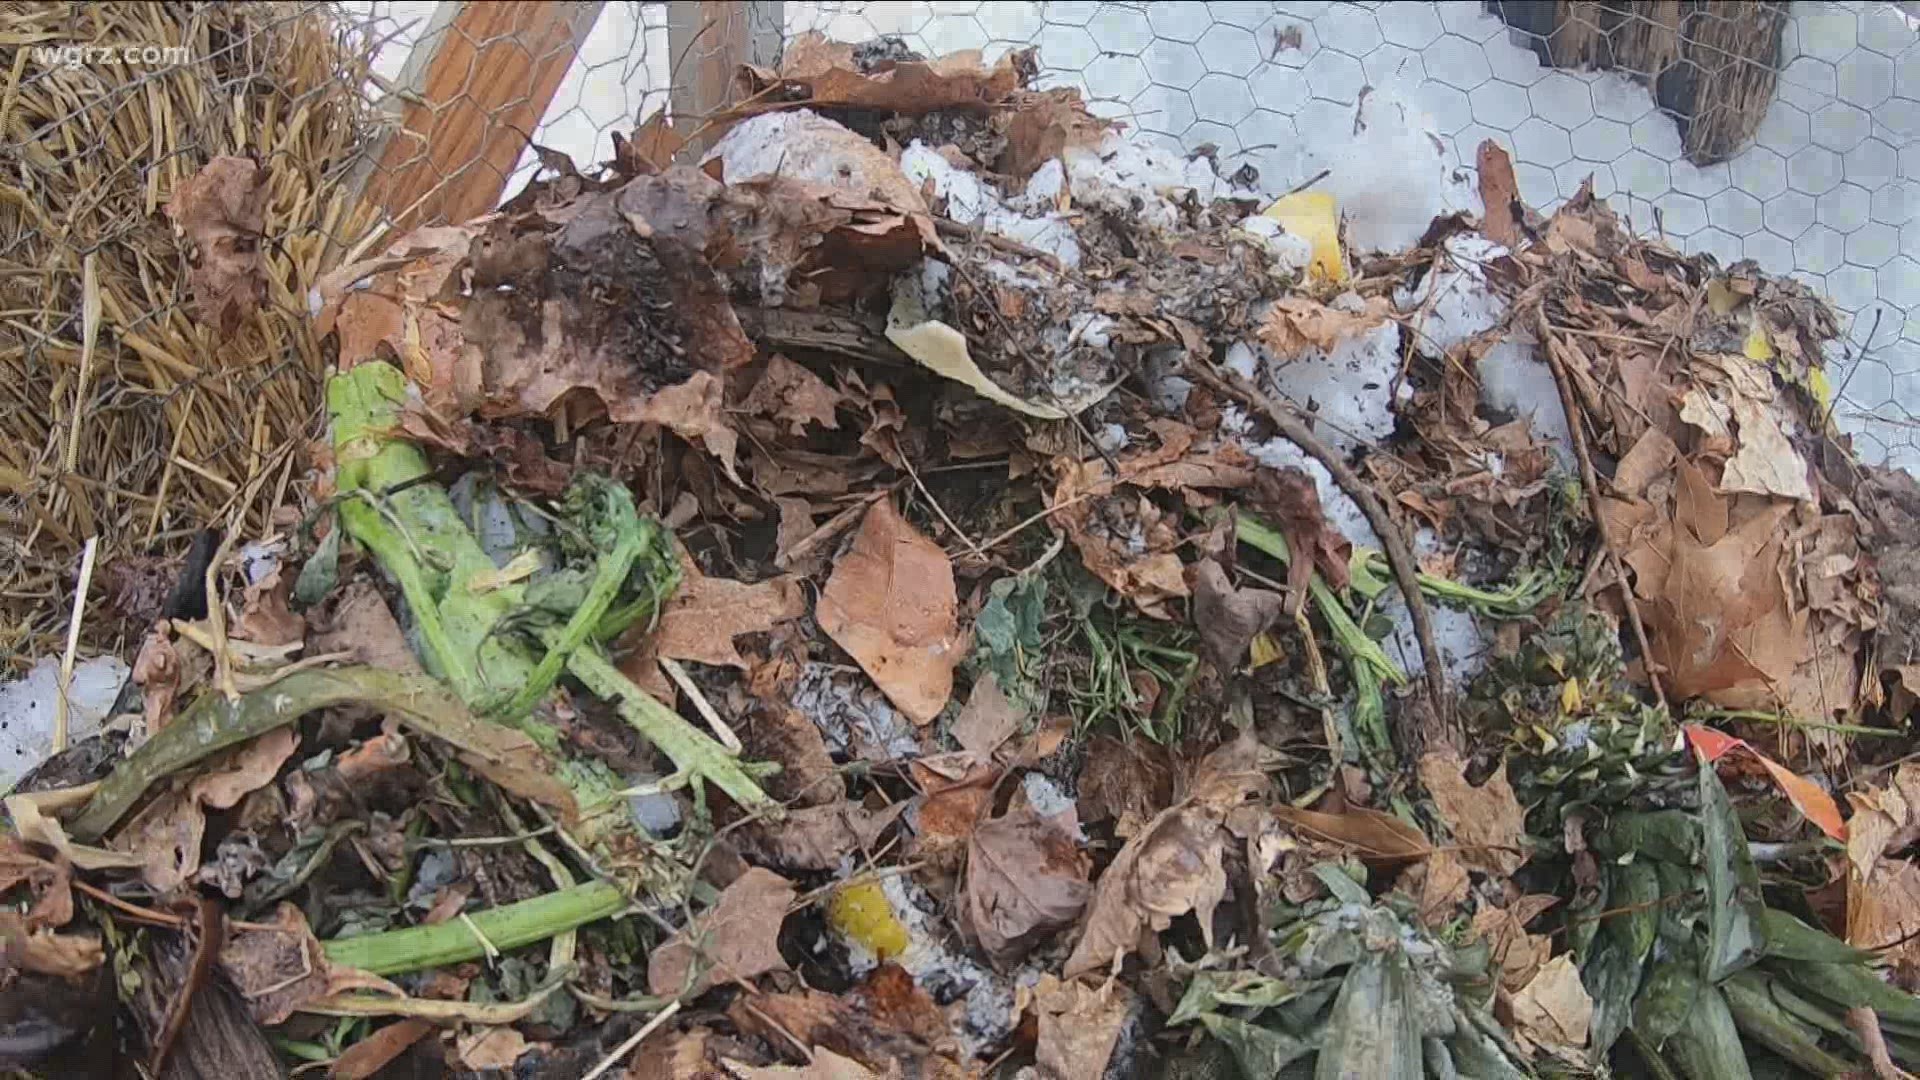 On this week's 2 the Outdoors, we'll give you a few tips on how to keep your compost pile going all through the winter.